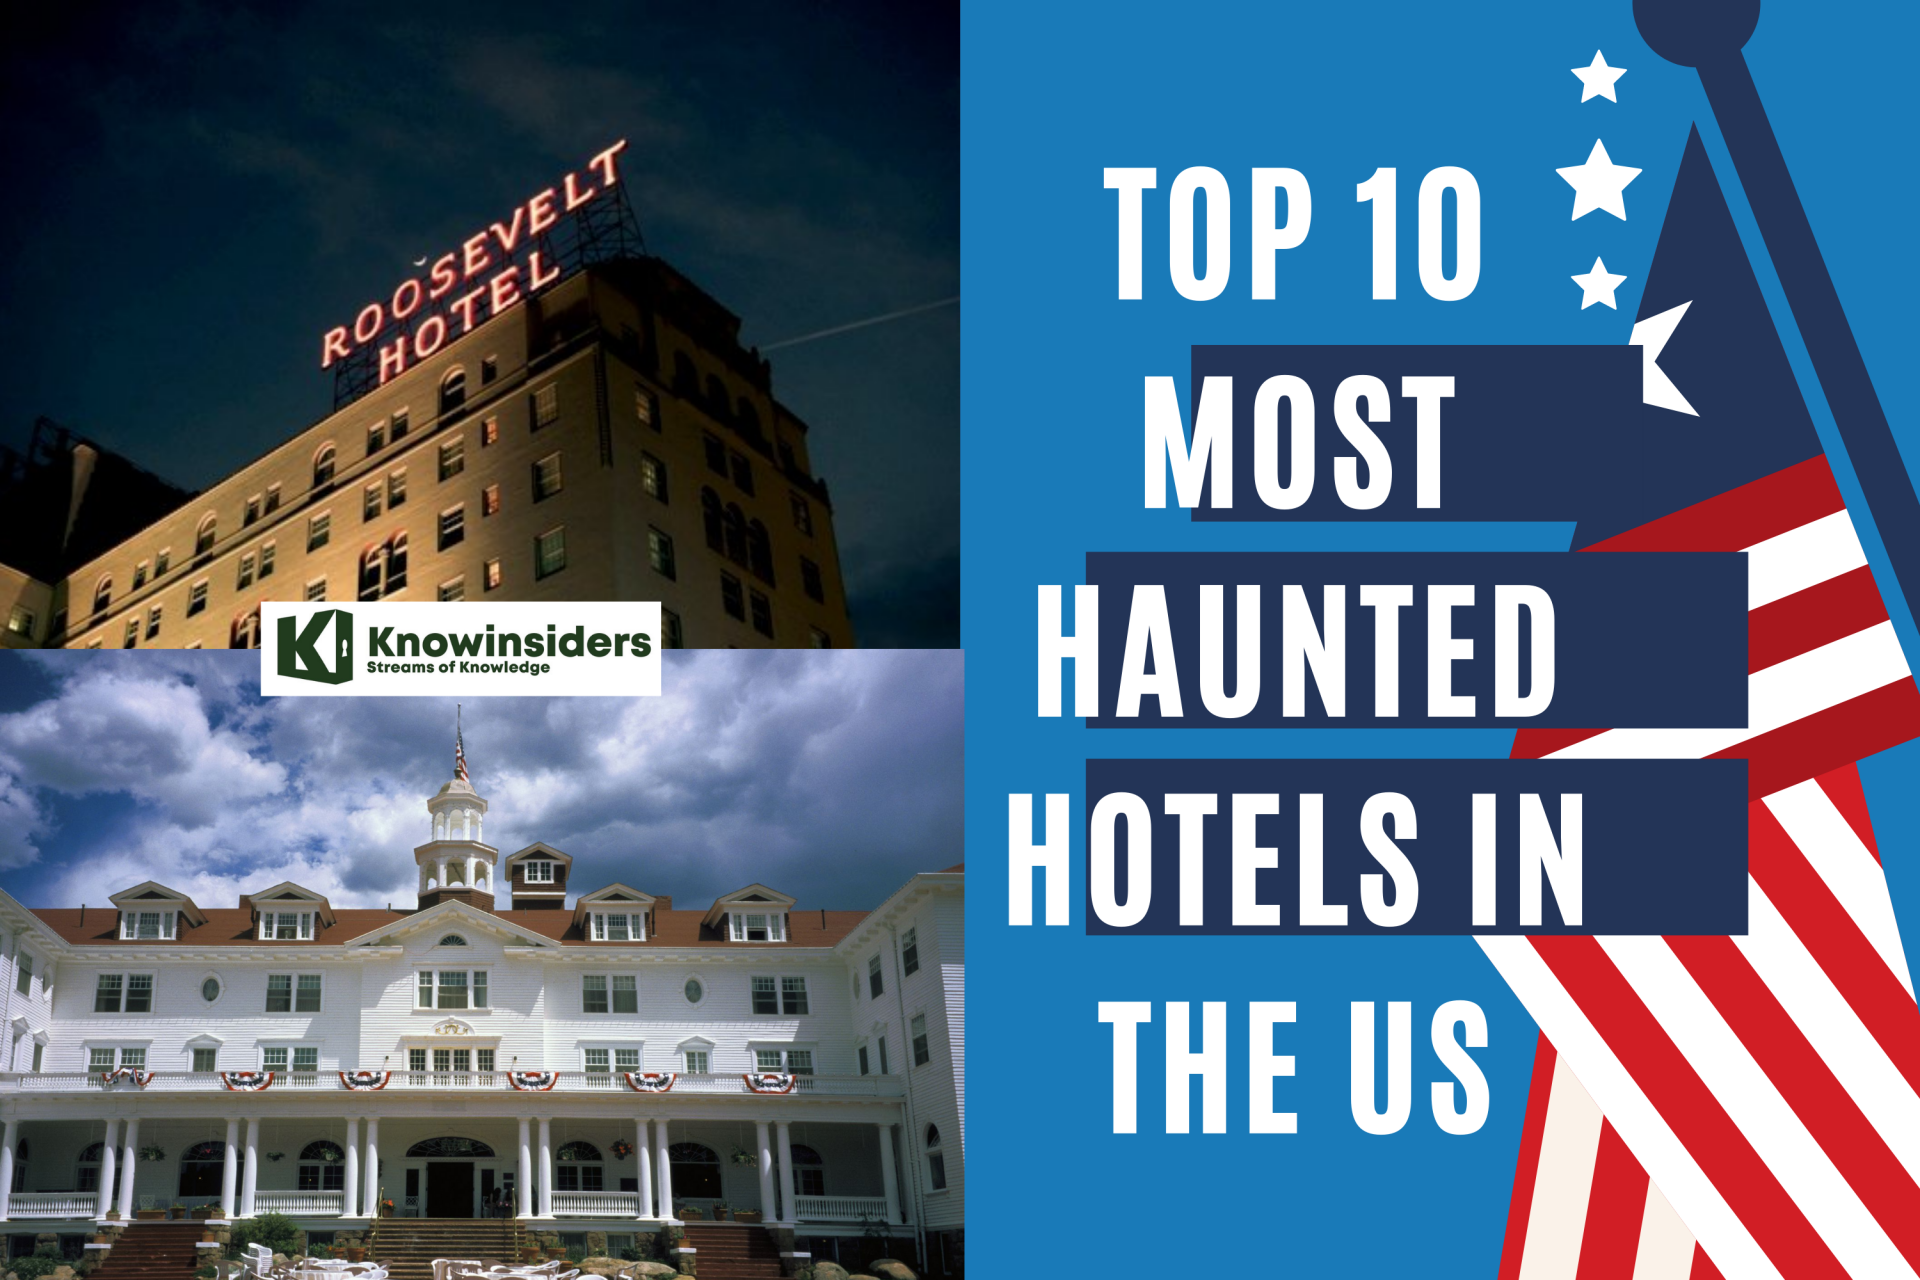 Top 10 Most Haunted Hotels in the US